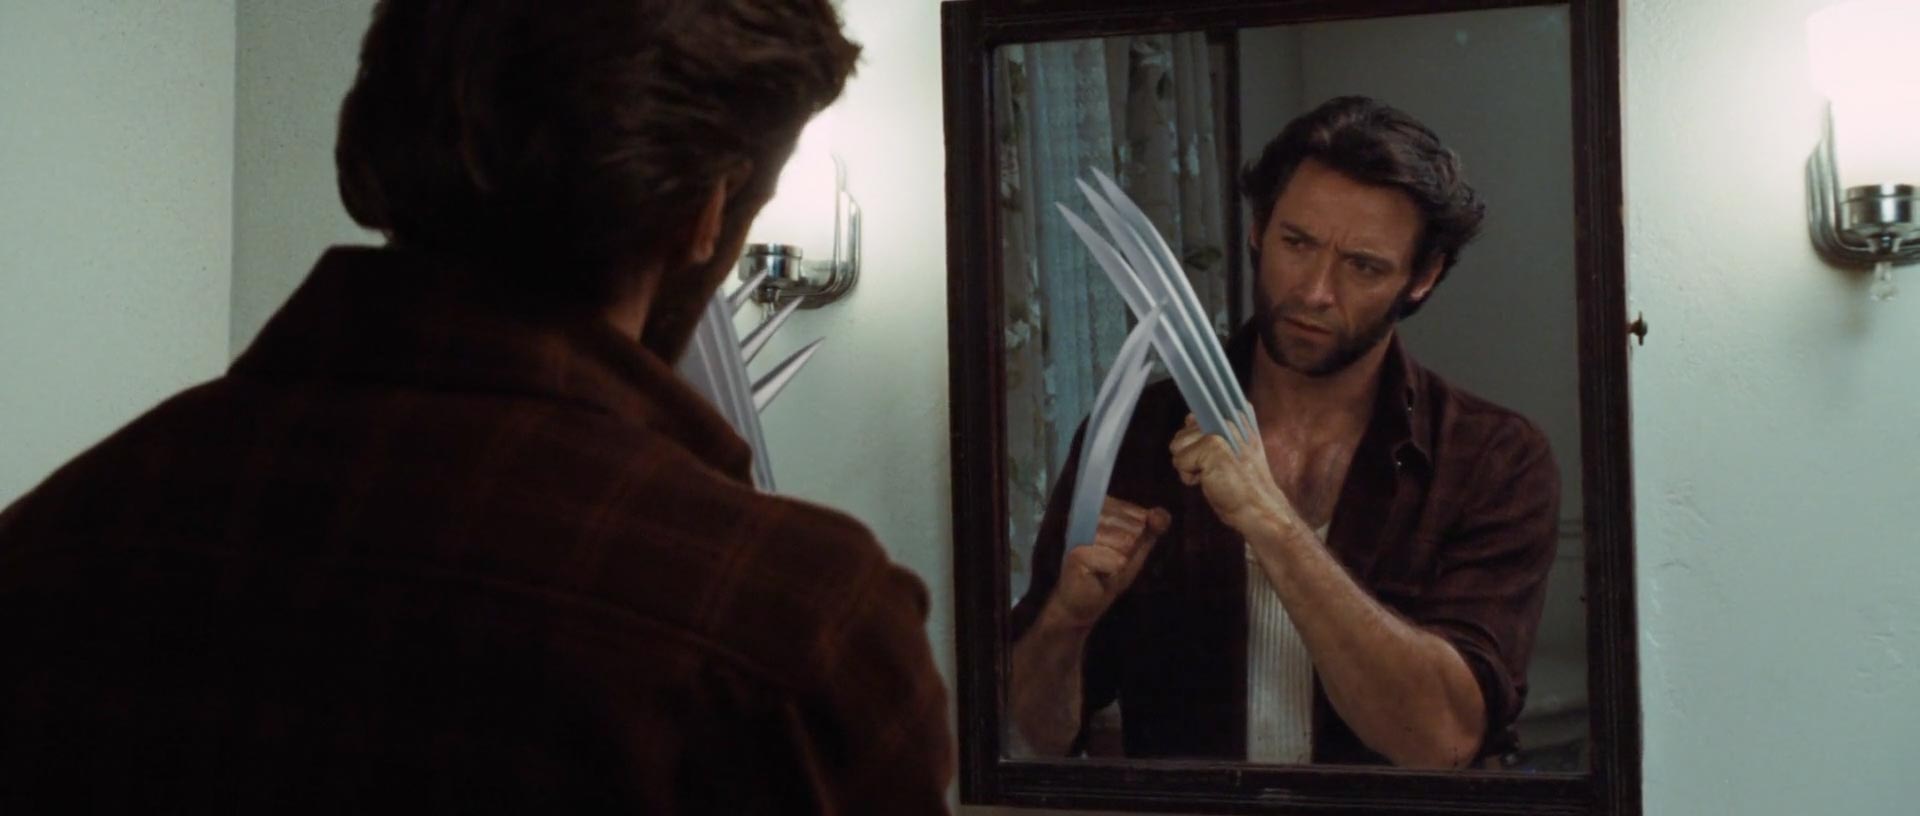 Bad Special Effects in Wolverine